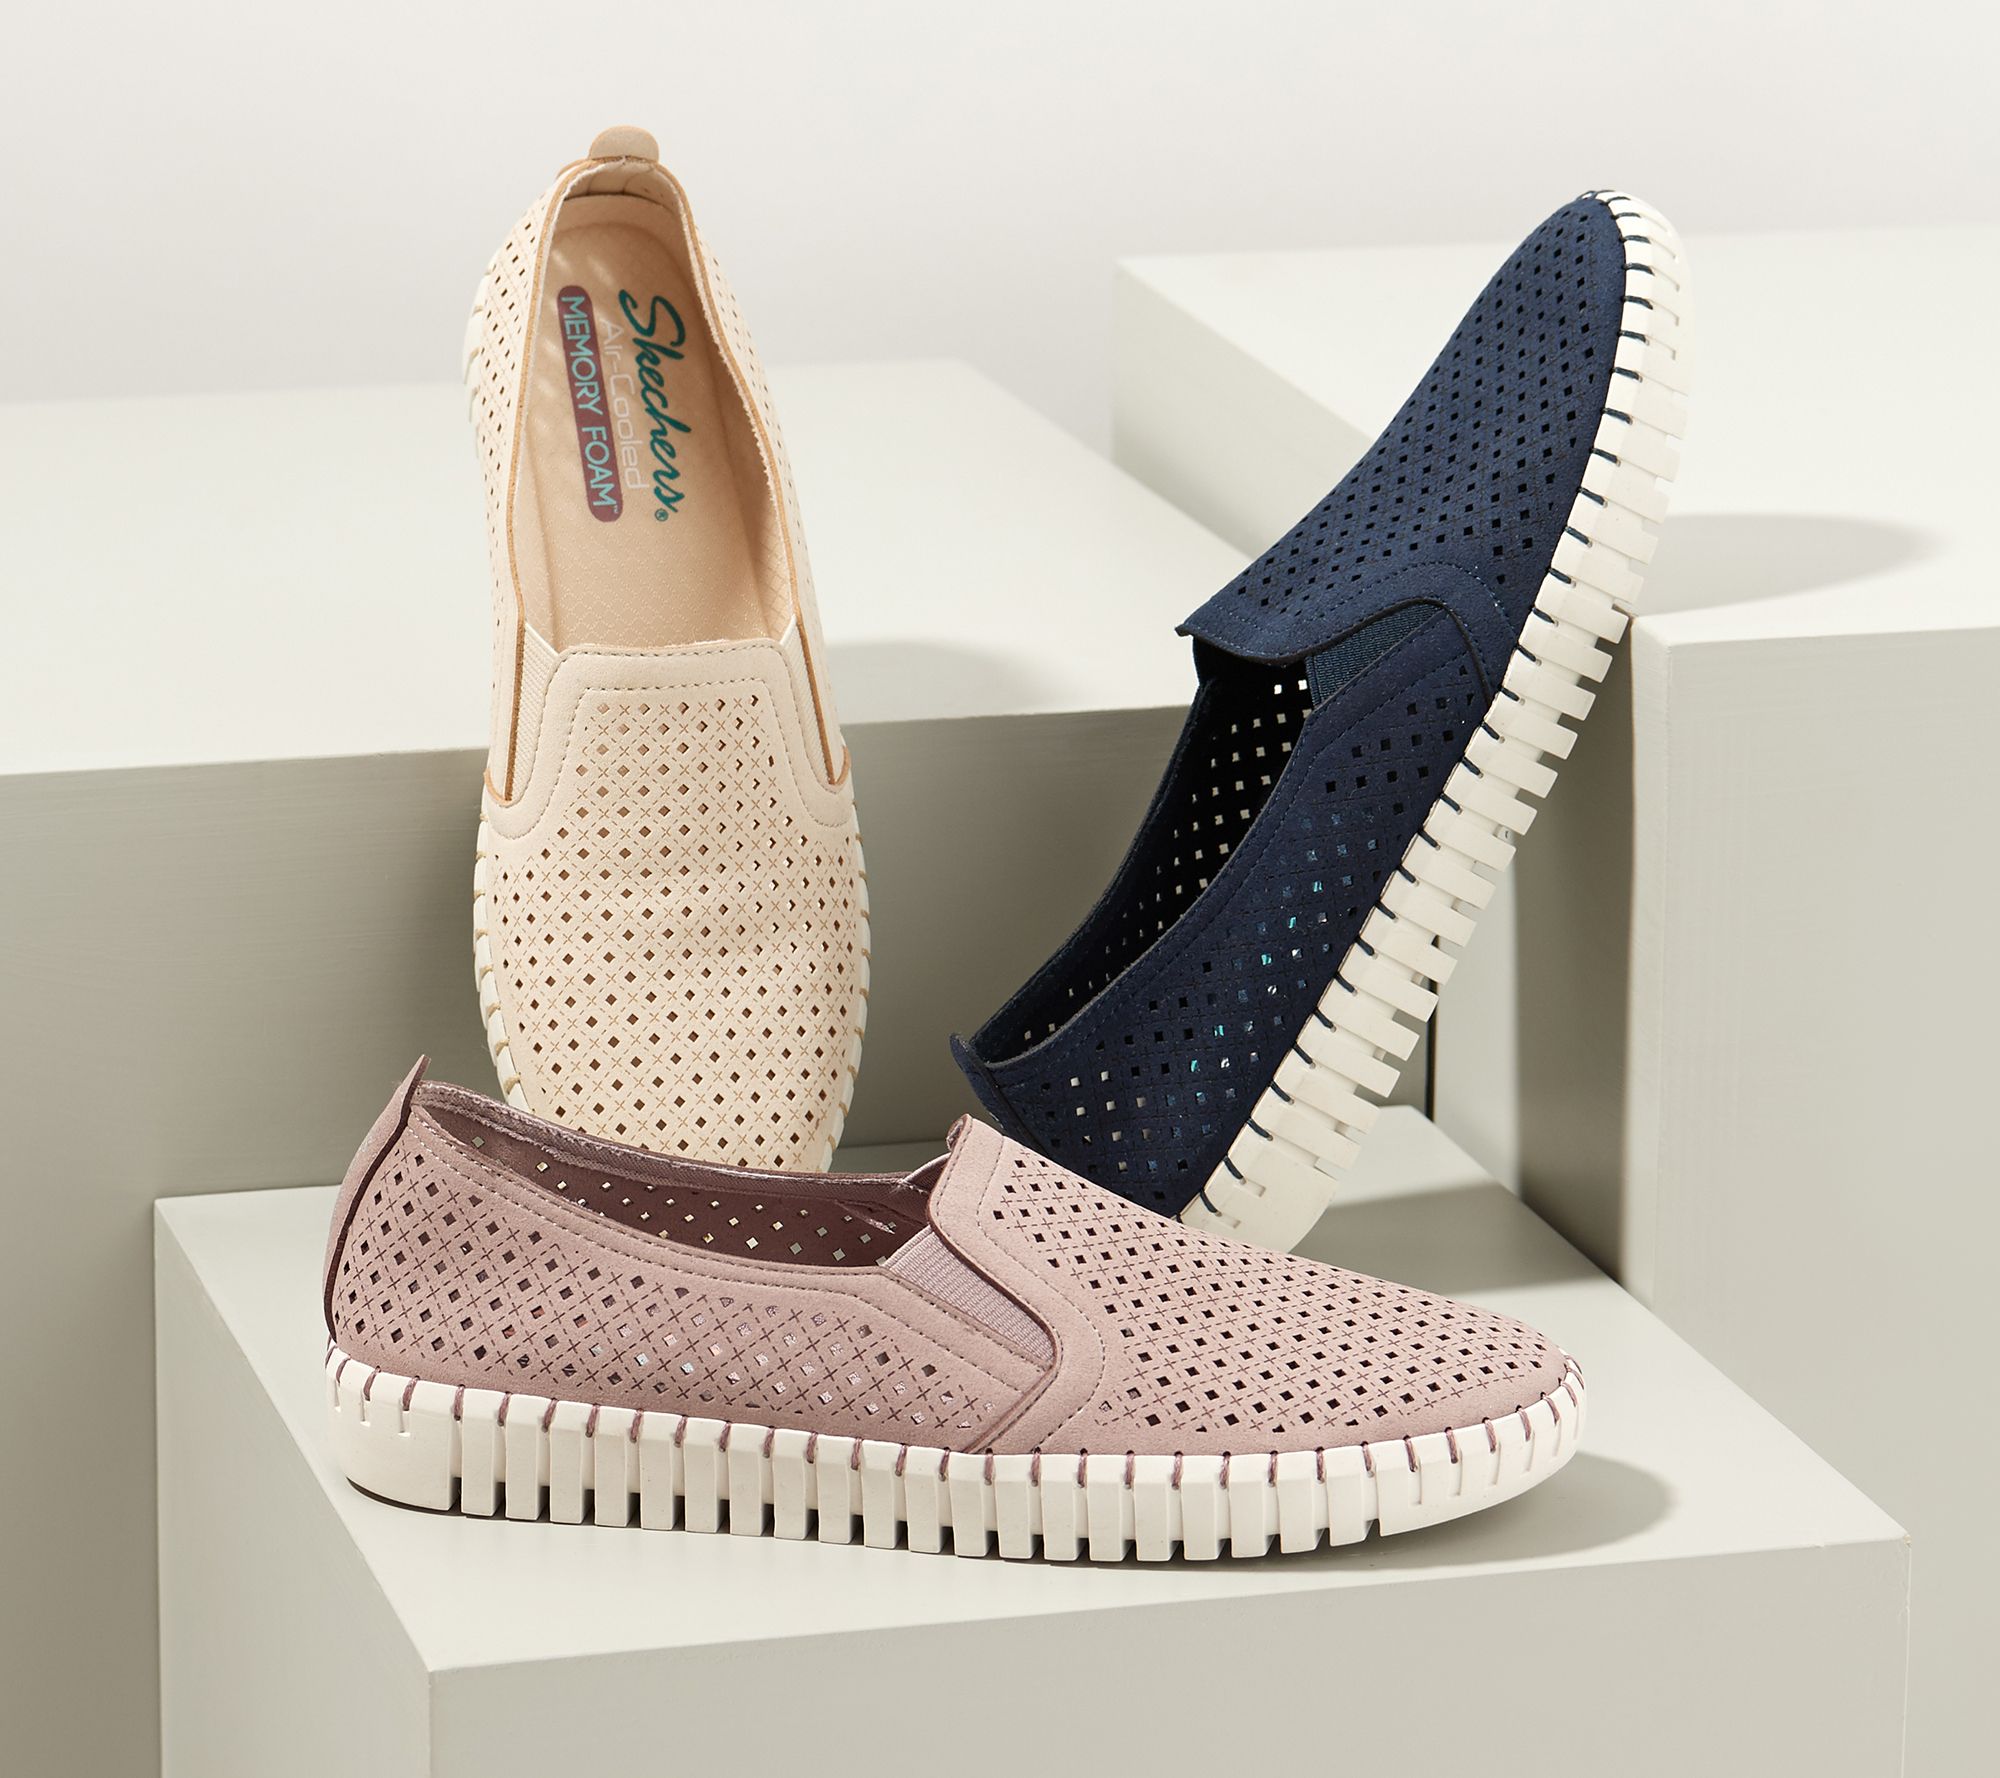 Skechers Perforated Slip-On Shoes - QVC.com